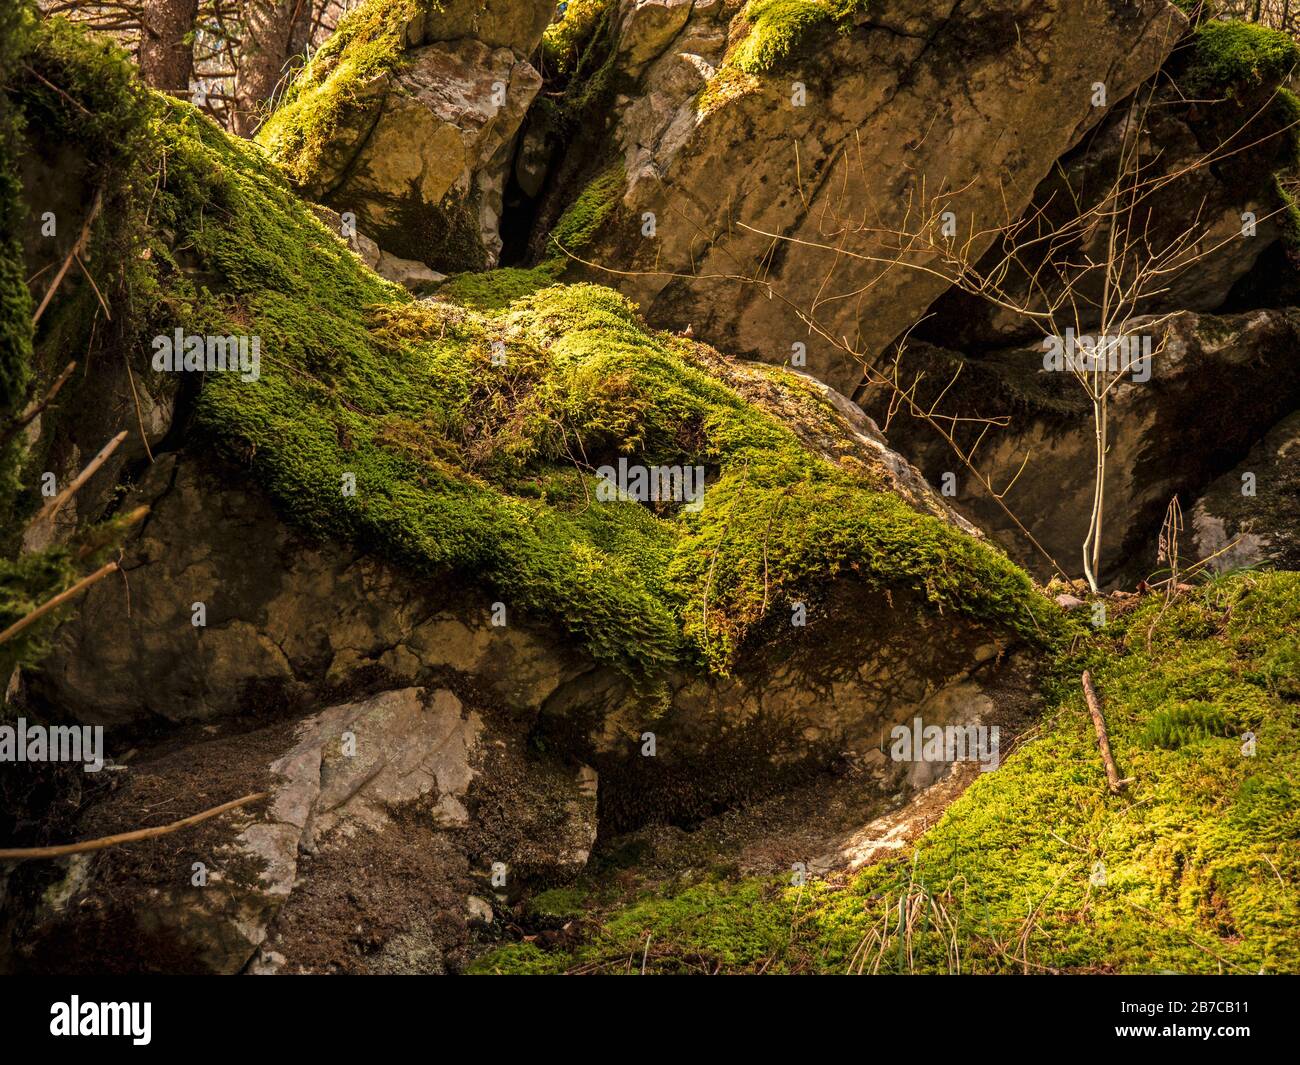 Close up shot of a small sapling growing in among some moss covered rocks and leaves in a magical green forest. Stock Photo